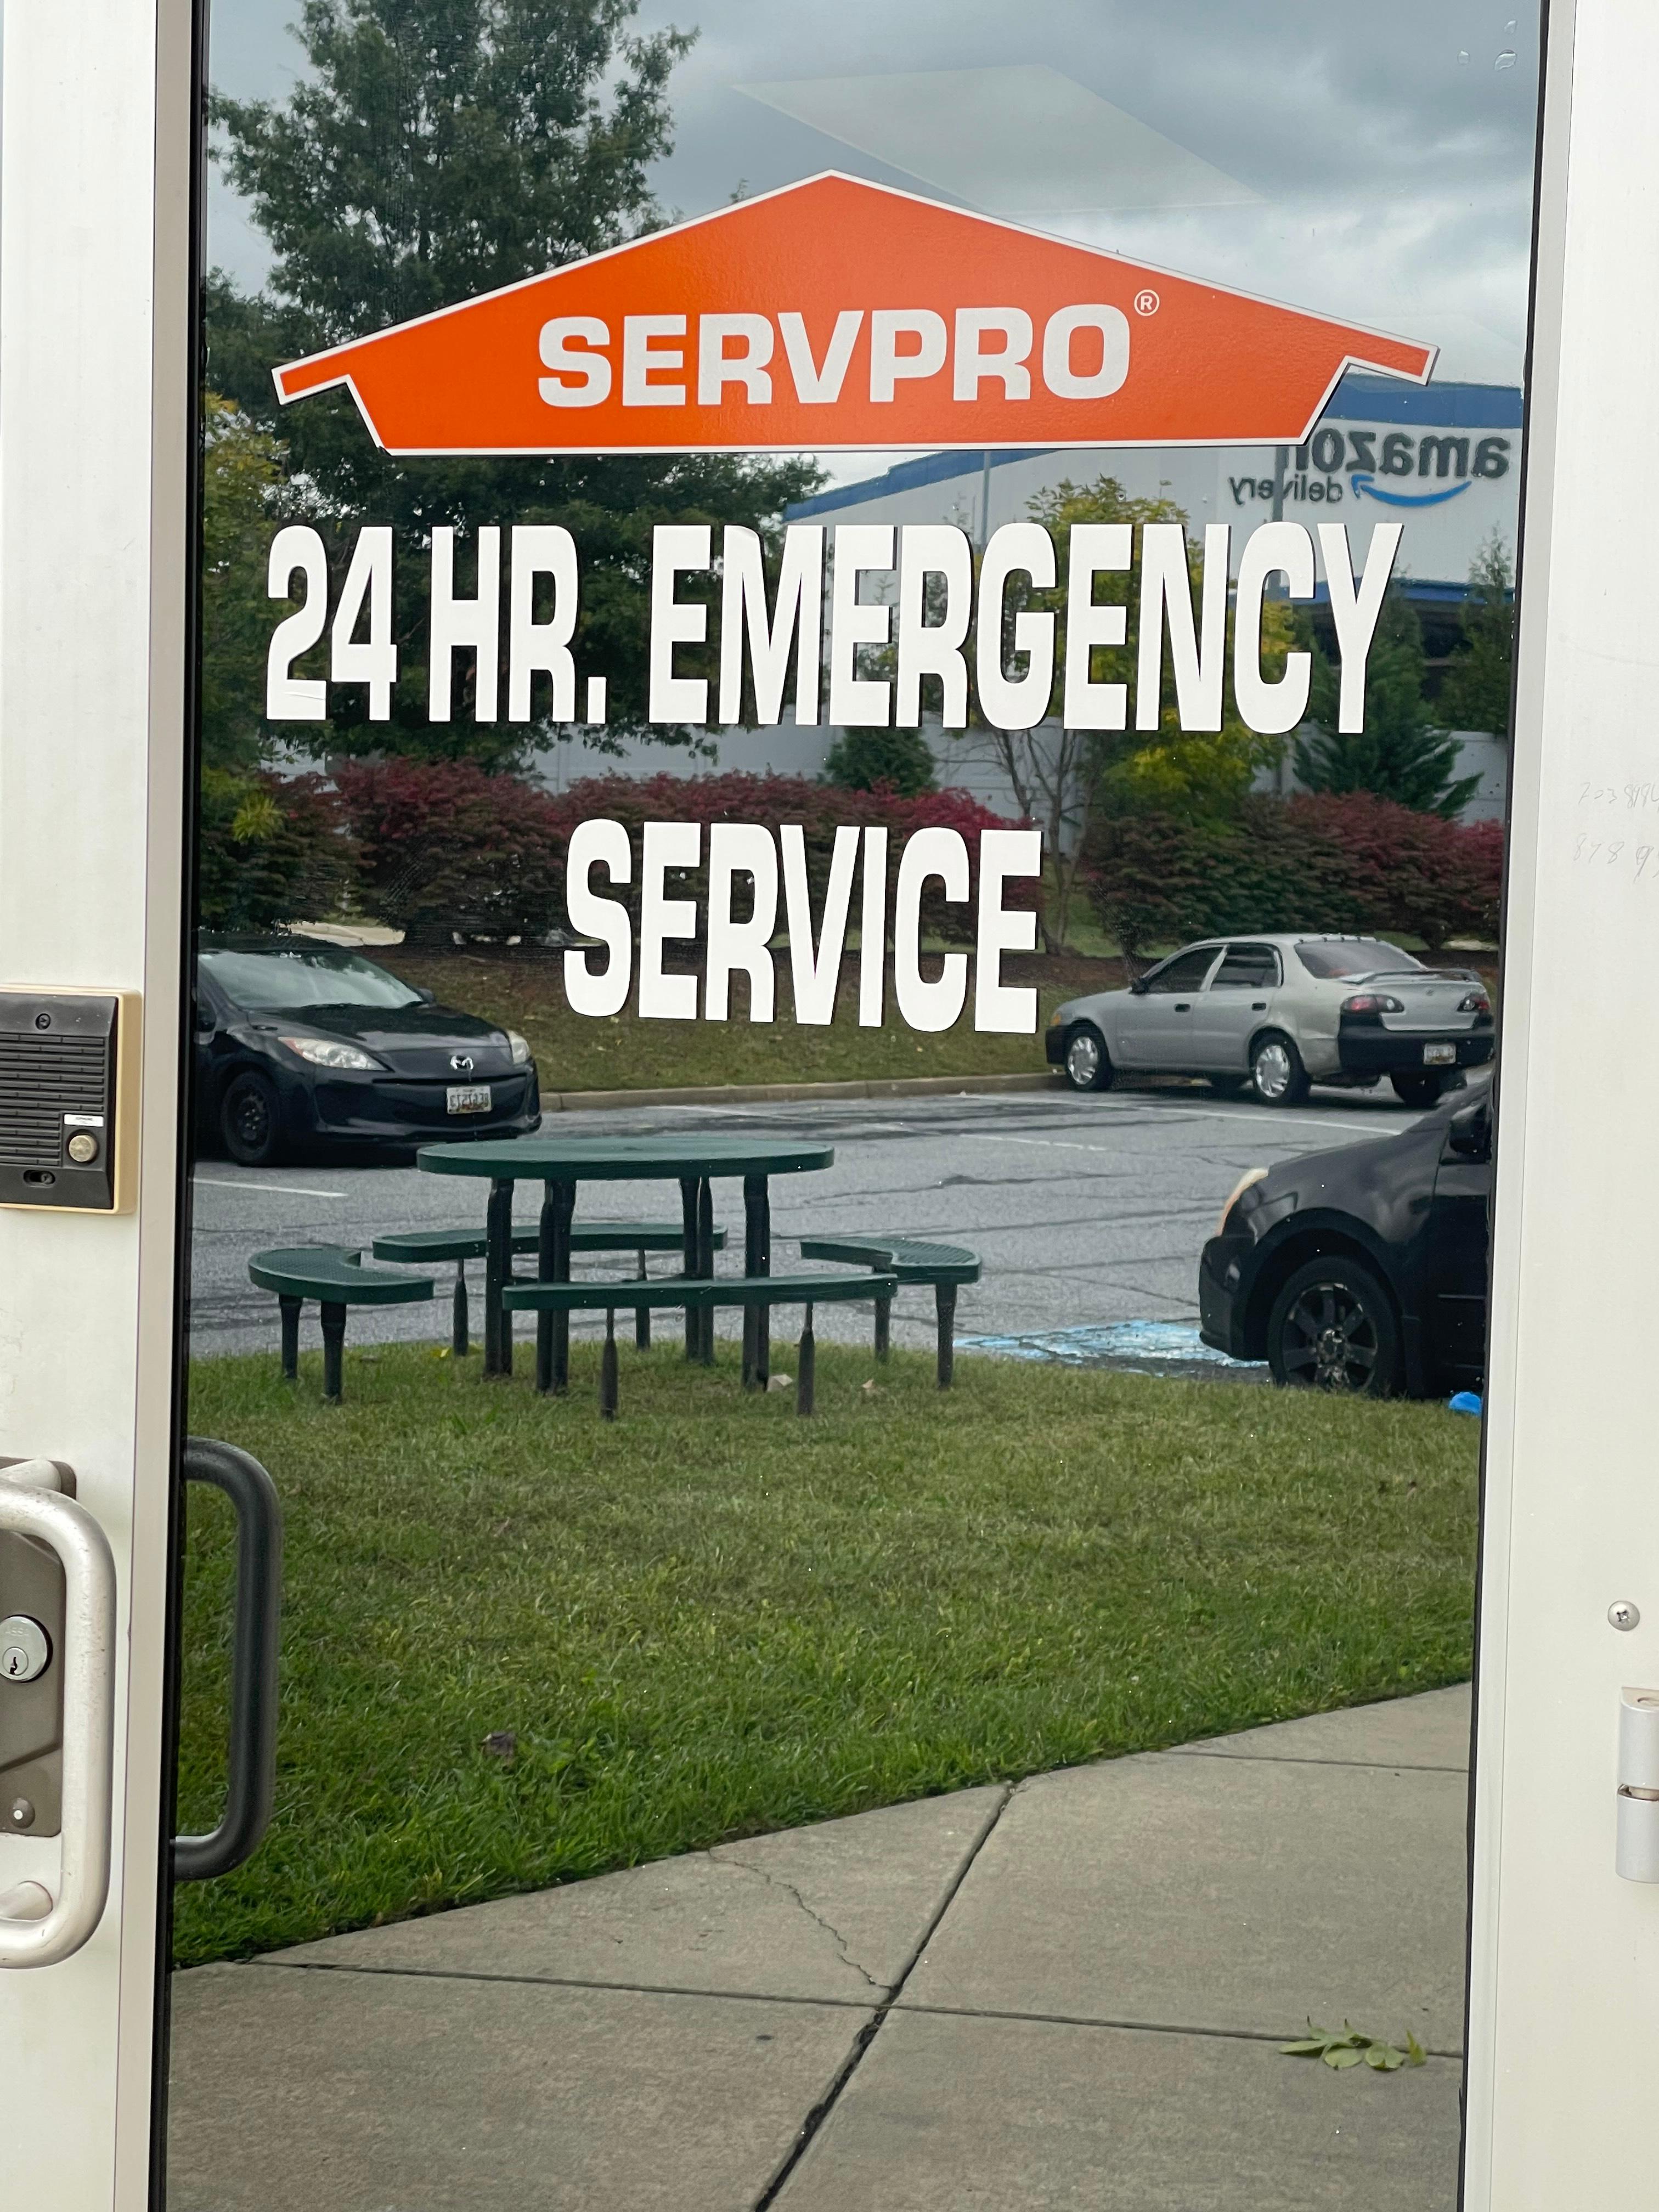 SERVPROÂ® Fire & Water Damage Cleanup and Restoration